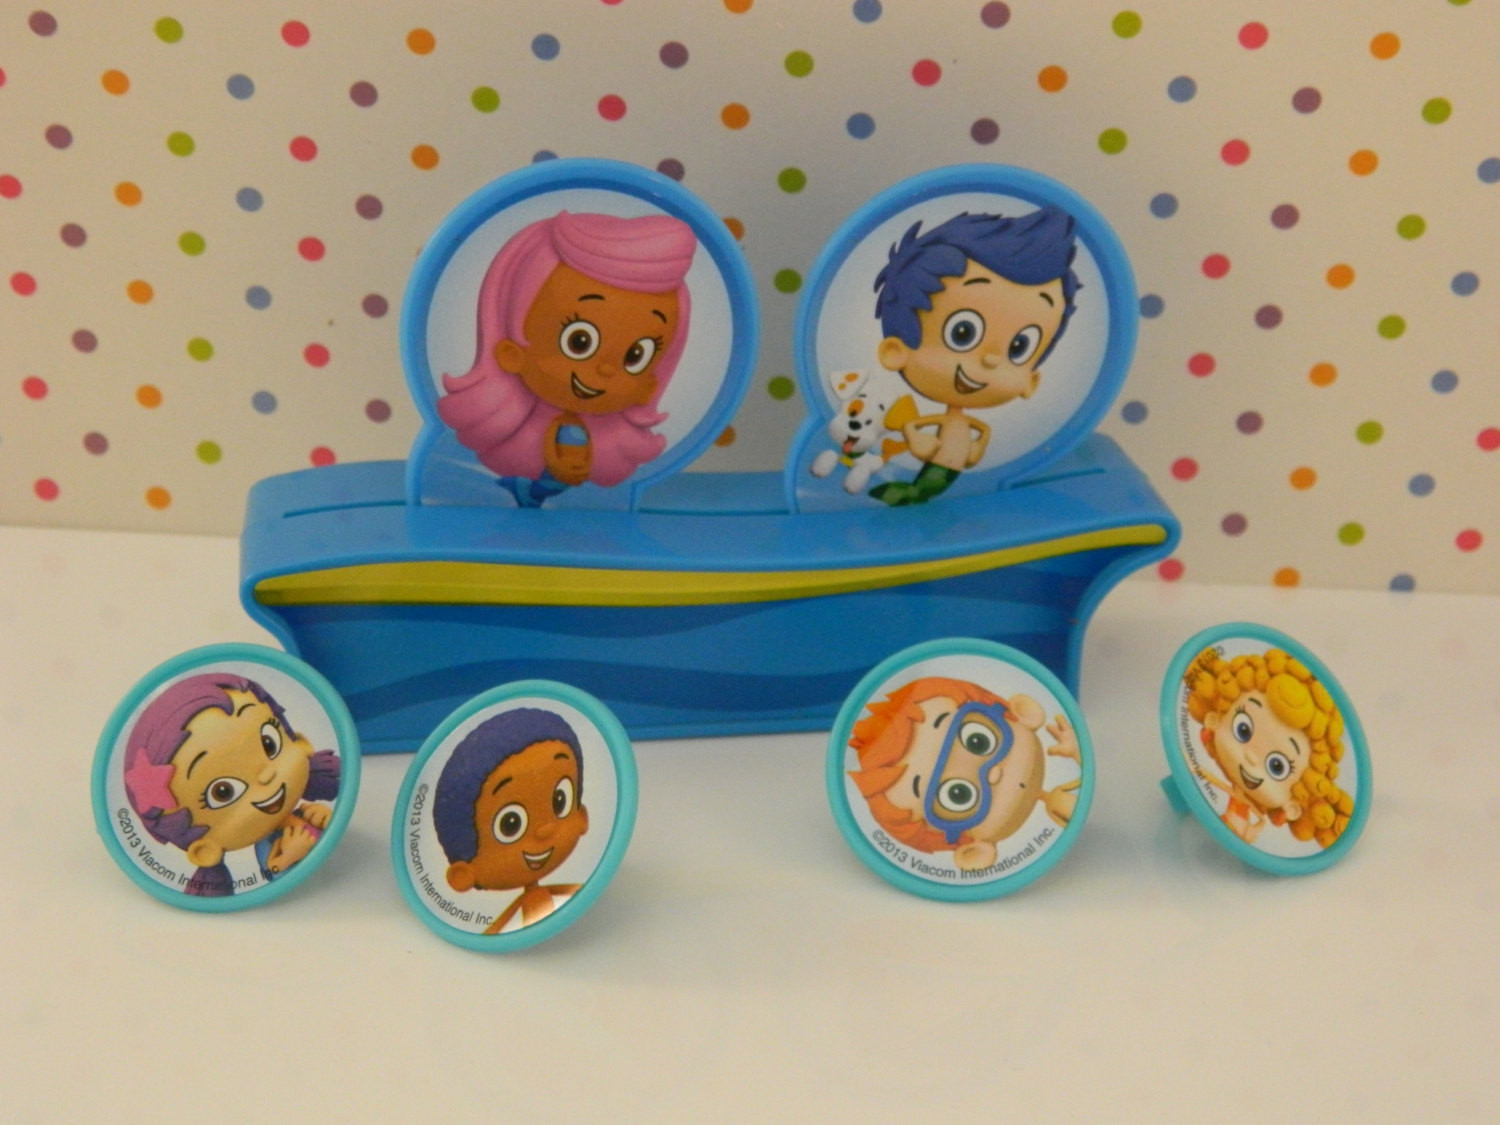 Bubble Guppies Birthday Cake Toppers
 Bubble Guppies Cake Topper Kit Party Decoration Cake Top